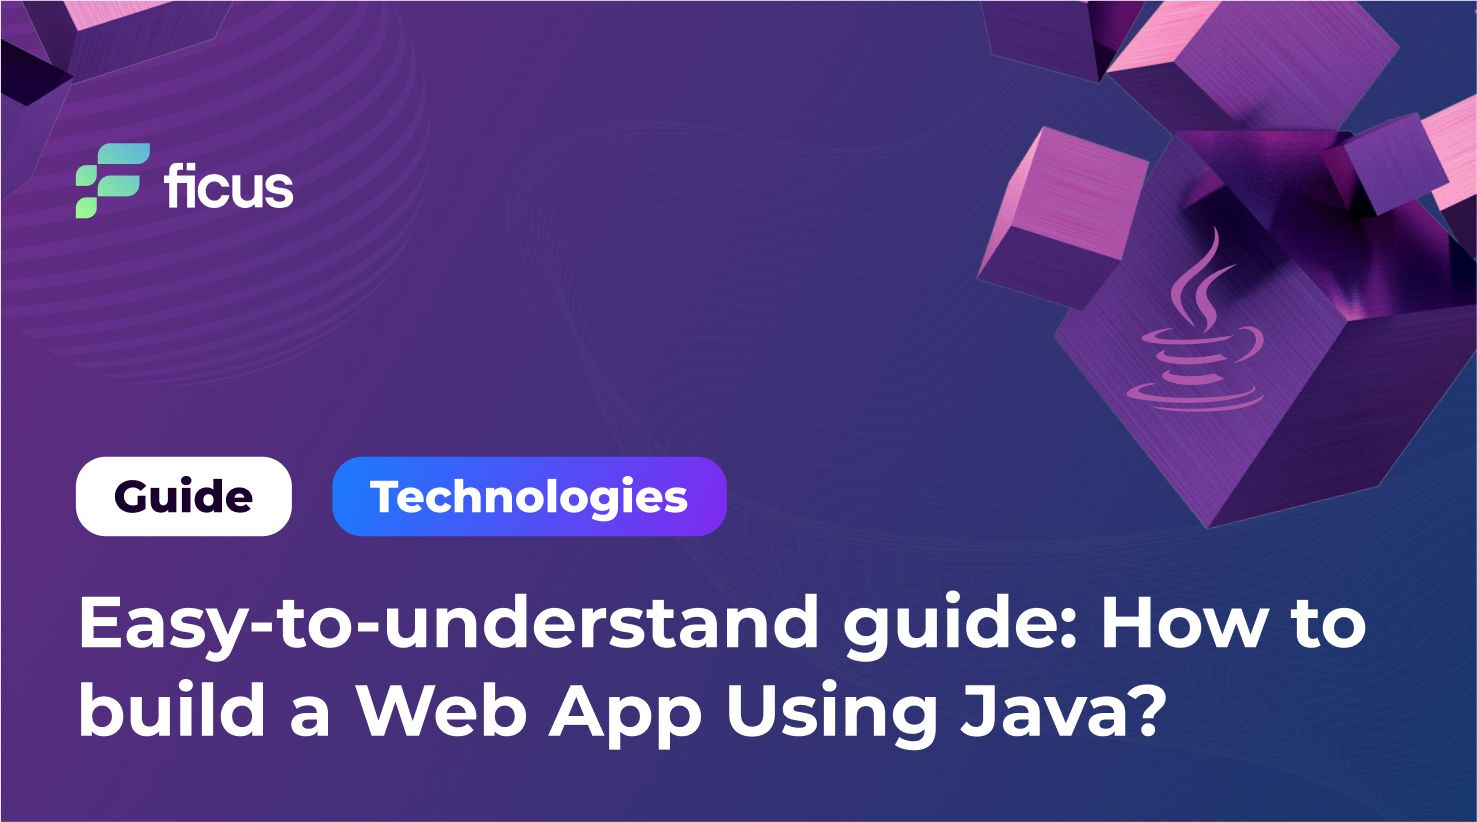 Easy-to-understand guide: How to build a Web App Using Java?